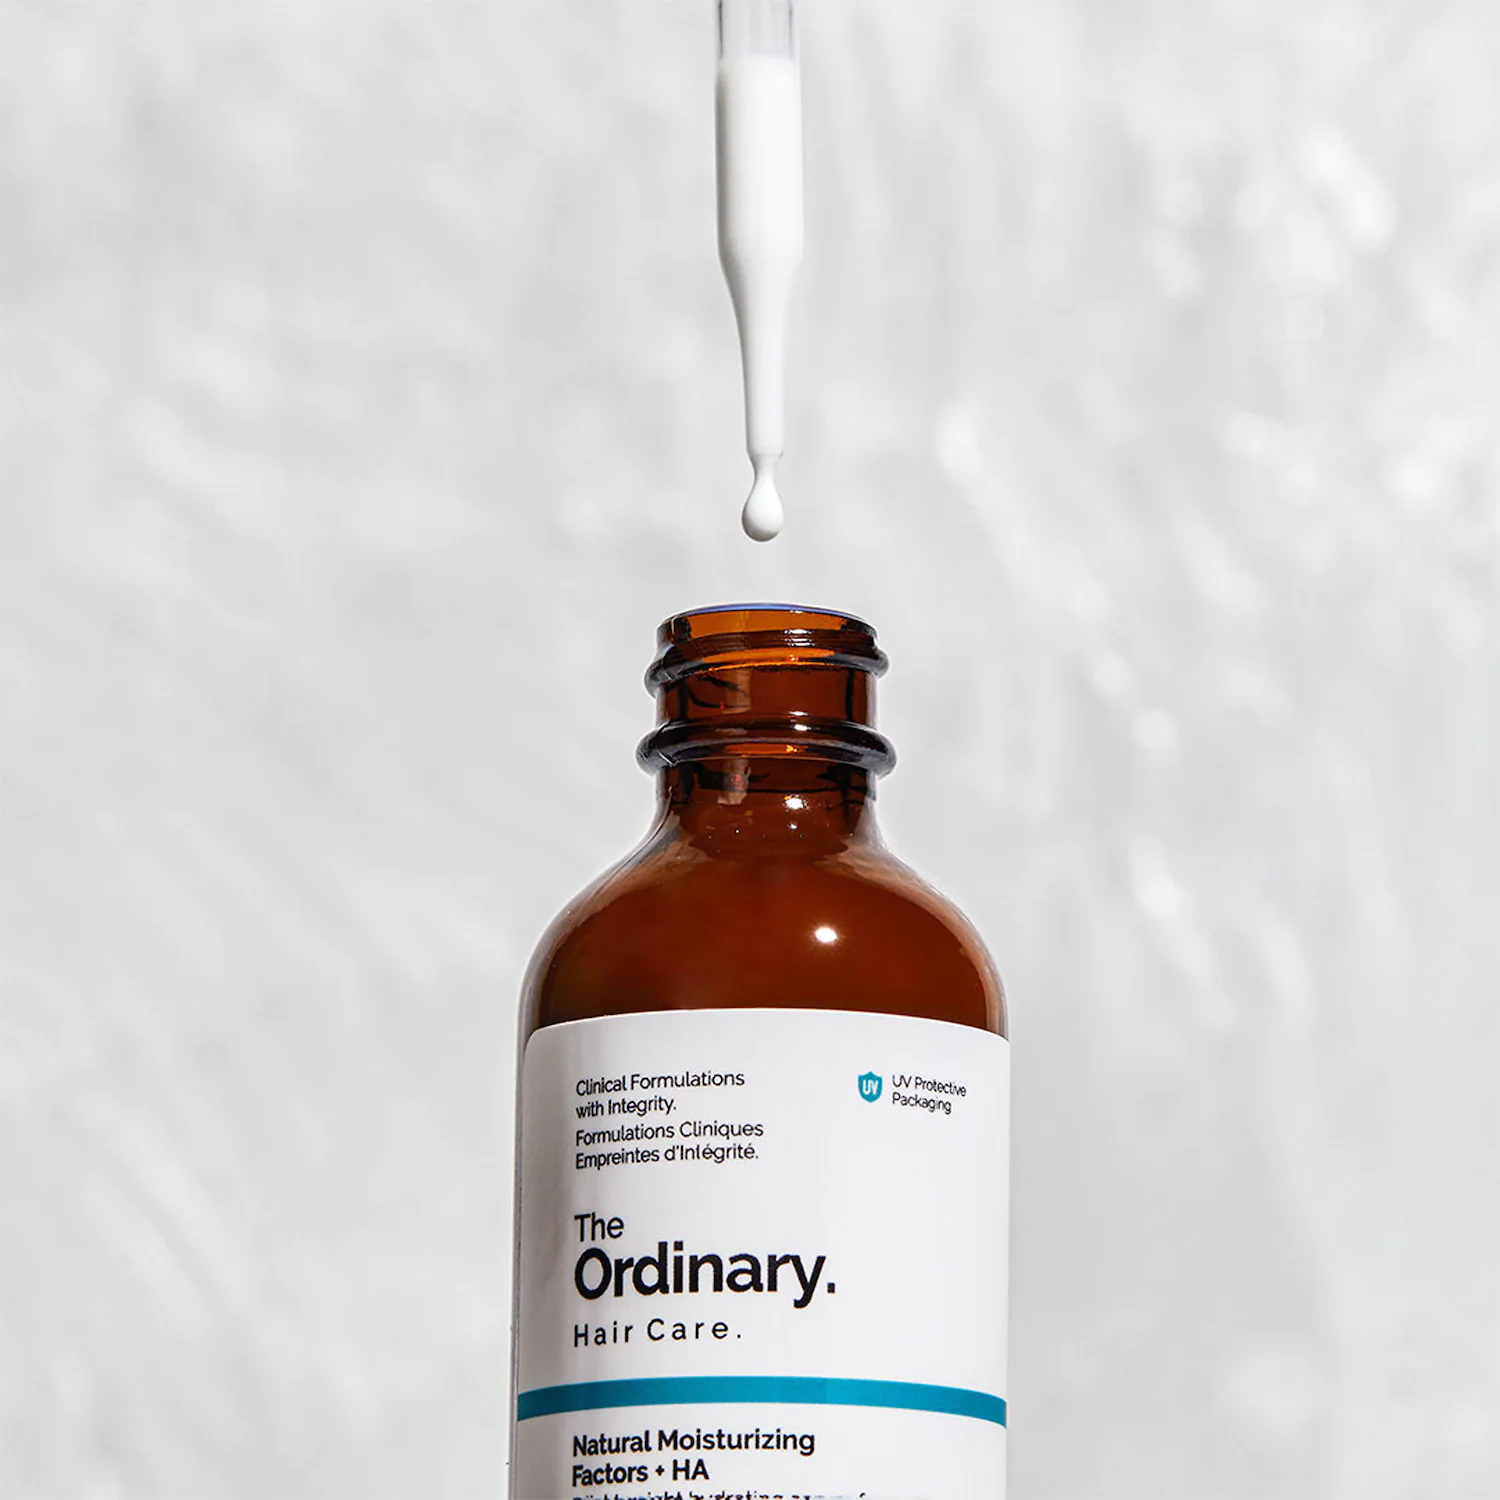 The ordinary natural. Сыворотка the ordinary natural Moisturizing Factors + ha).. The ordinary natural Moisturizing Factors. The ordinary the ordinary natural Moisturizing Factors + ha. Lyclear for.Scalp.